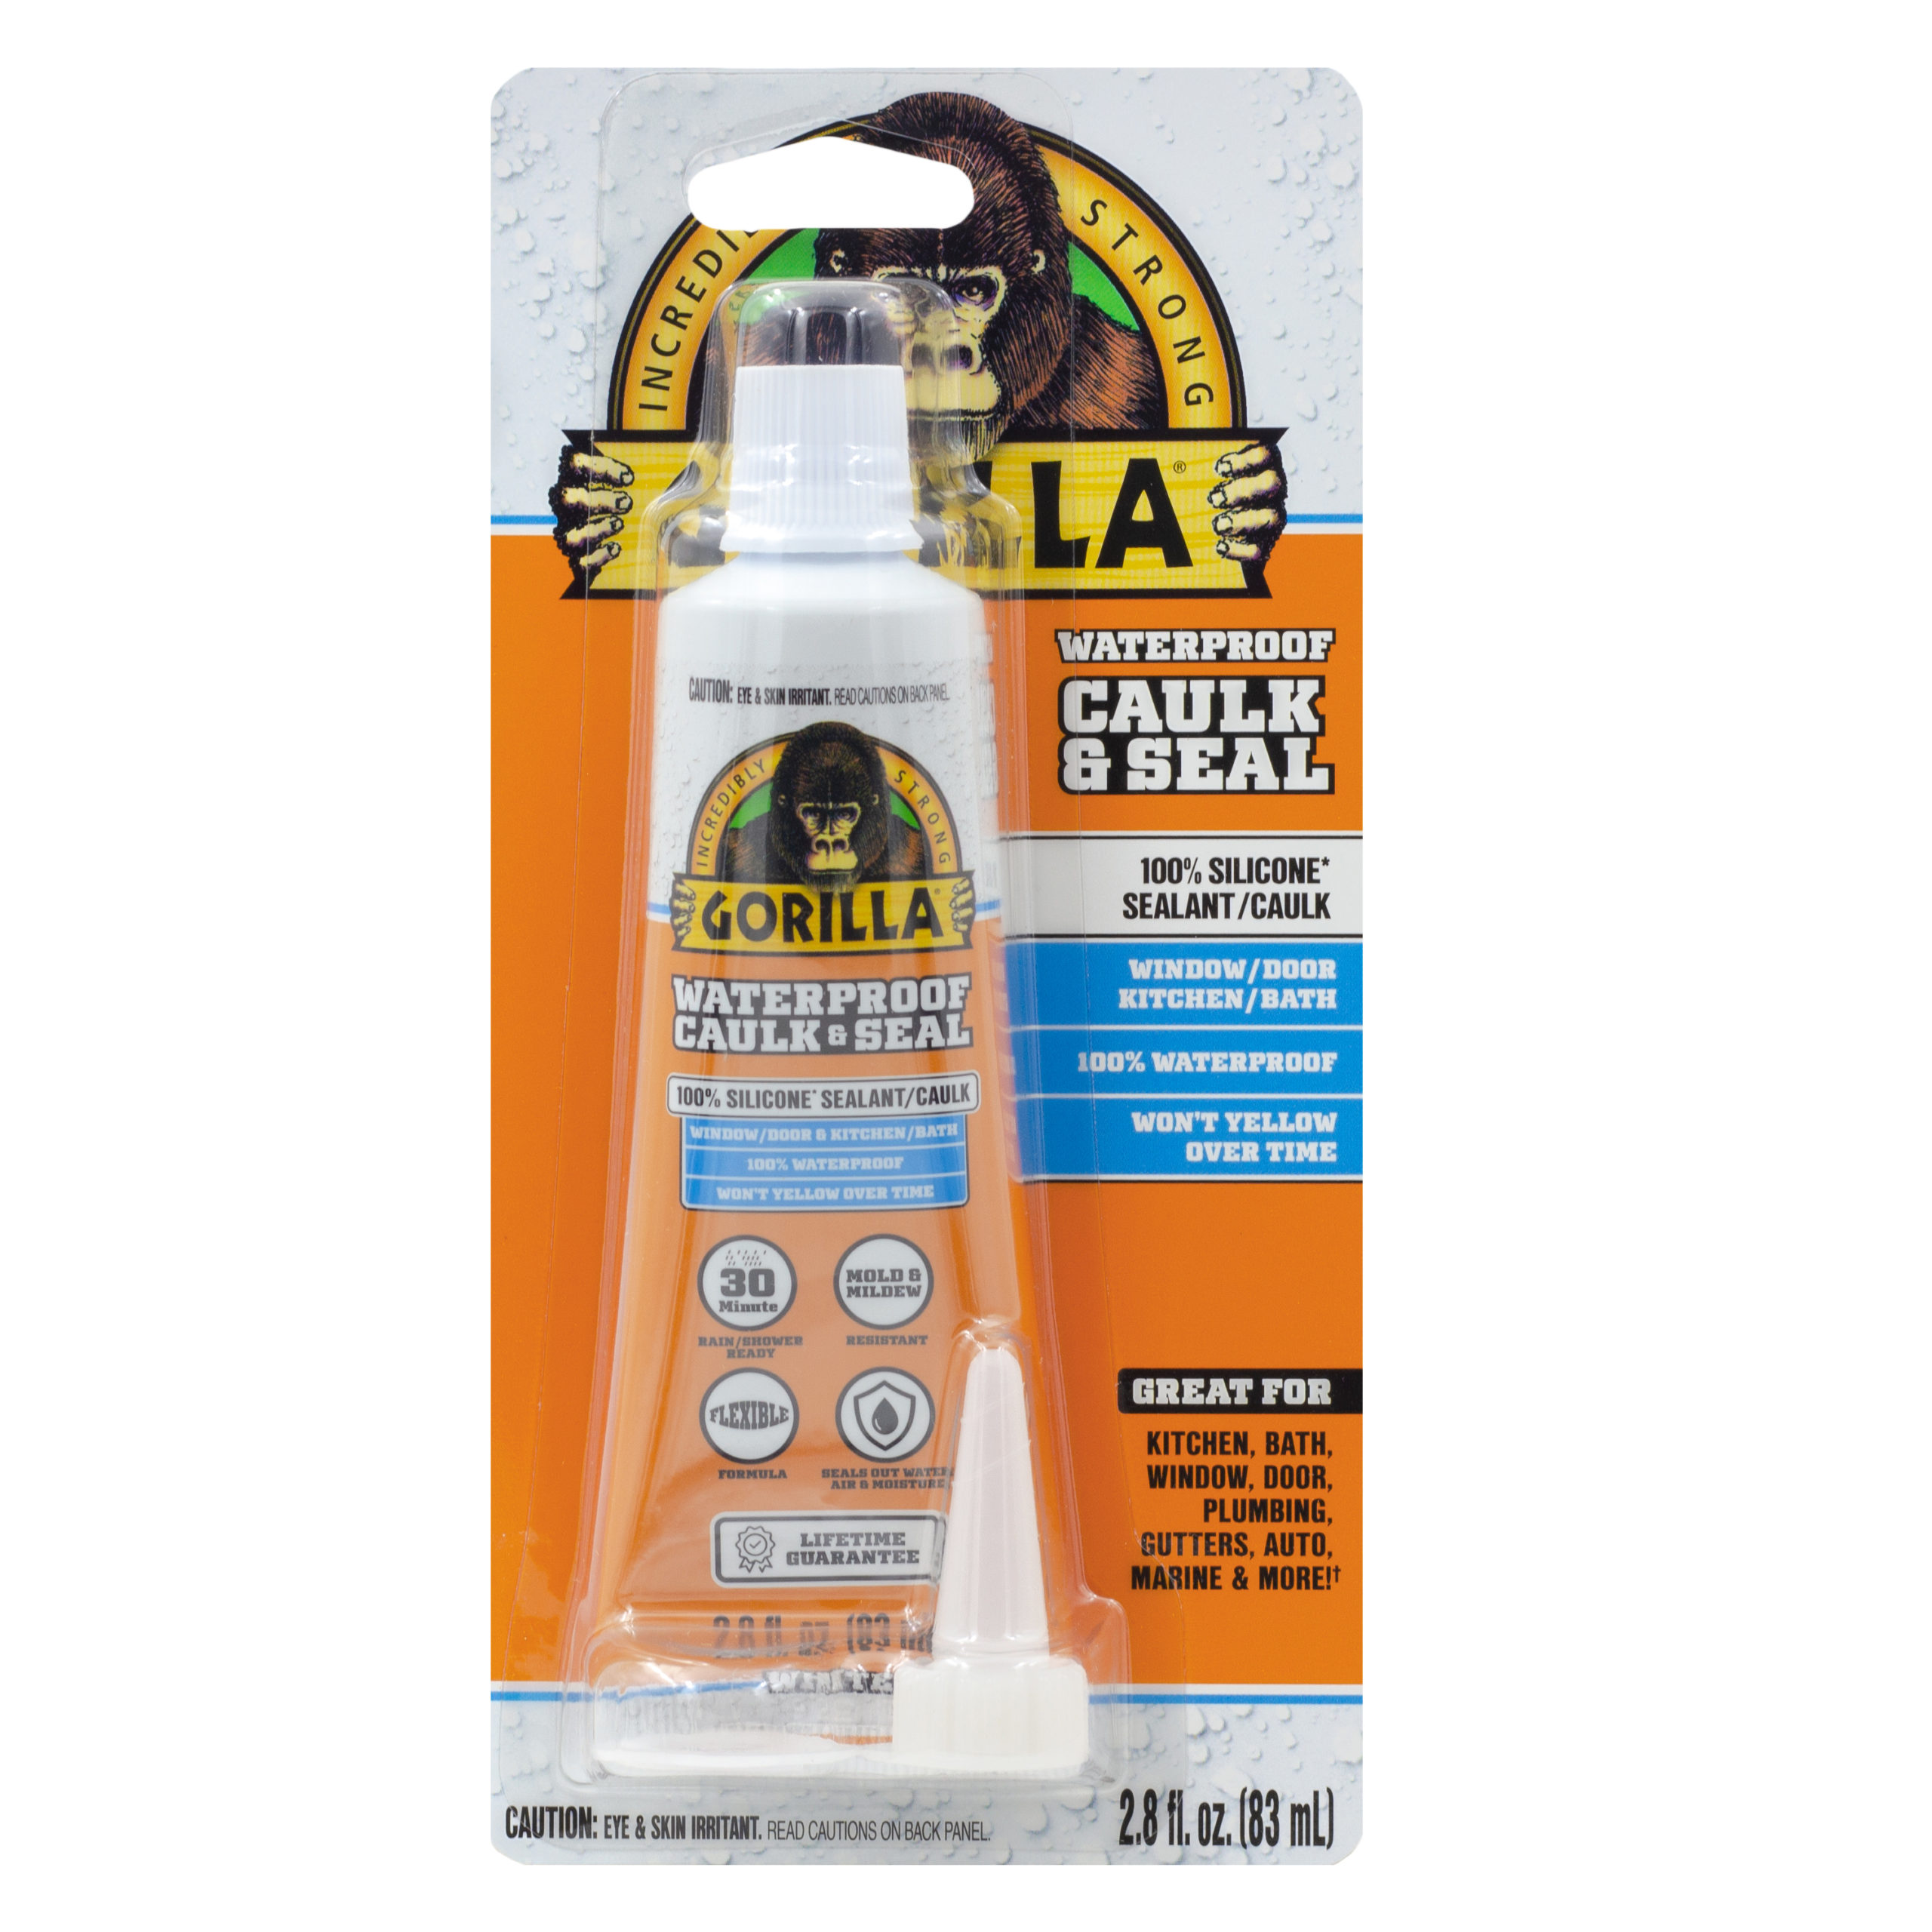 GORILLA Waterproof Caulk & Seal 100 percent Silicone Sealant (2.8 ounces). This Powerful Silicone Sealant Seals Out Water, Air And Moisture And Is Great For Kitchen, Bath, Window, Doors, Auto, Marine, Plumbing, Gutters And More! Ready For Water Exposure In Just 30 Minutes, This Waterproof Sealant Is Mold & Mildew Resistant. The Clear Silicone Sealant Won’t Yellow, Shrink Or Crack Over Time. 109329